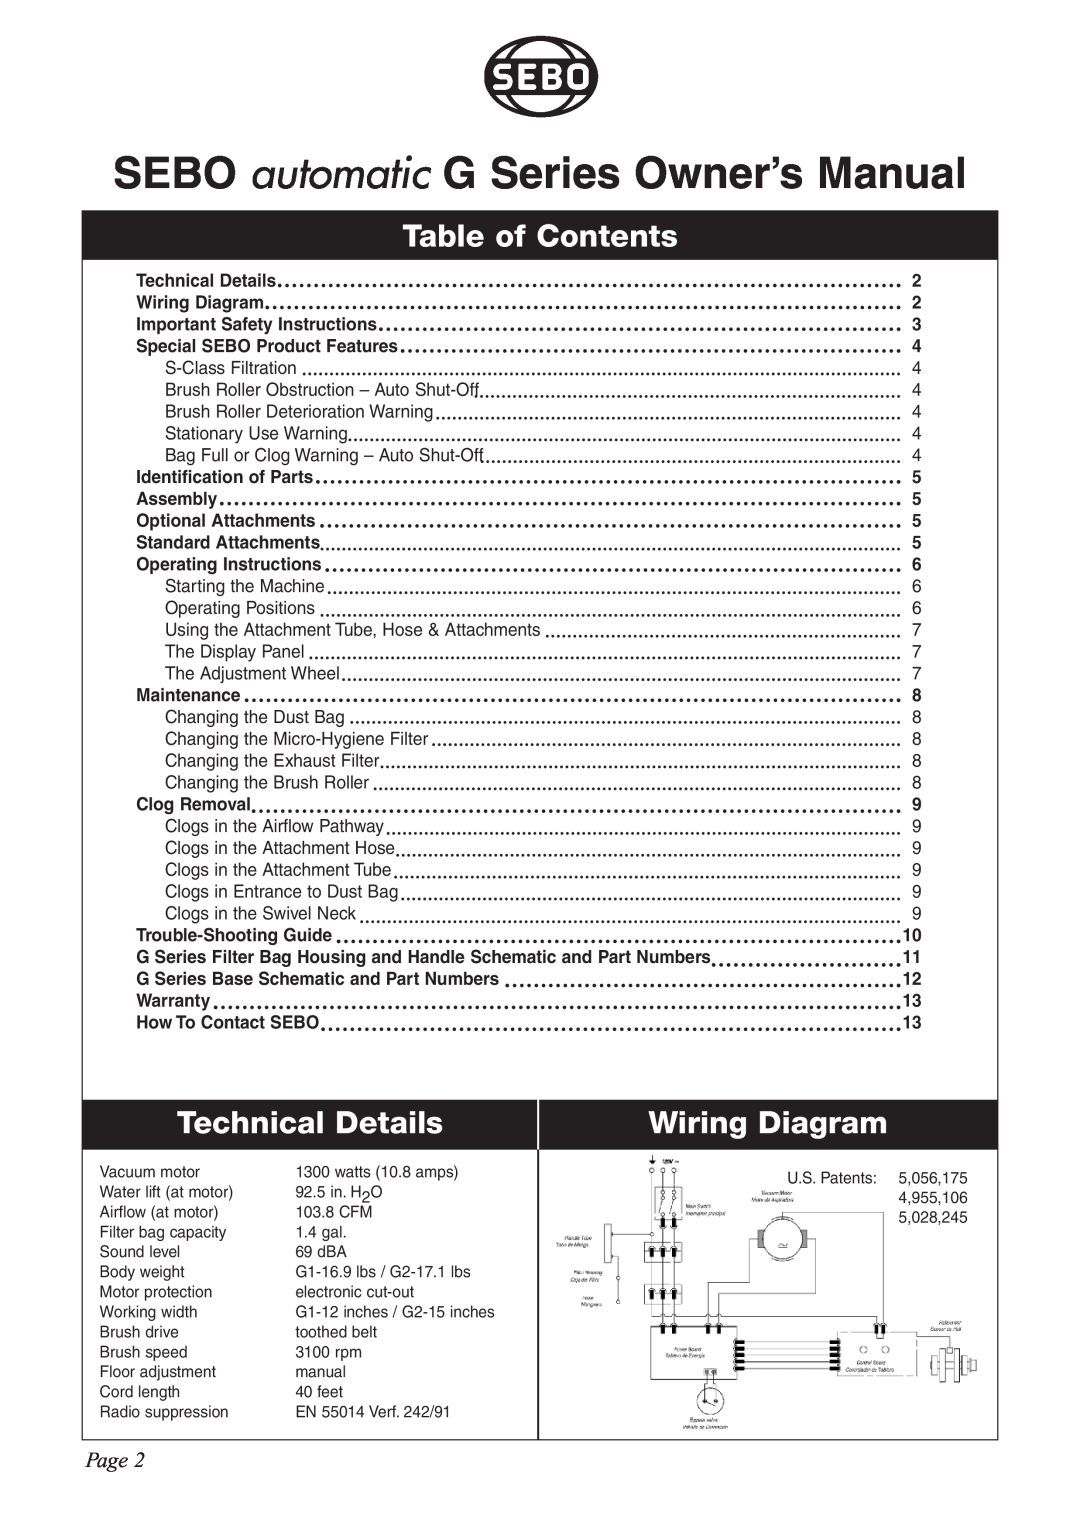 Sebo G-SERIES manual Table of Contents, Technical Details, Wiring Diagram, Page 